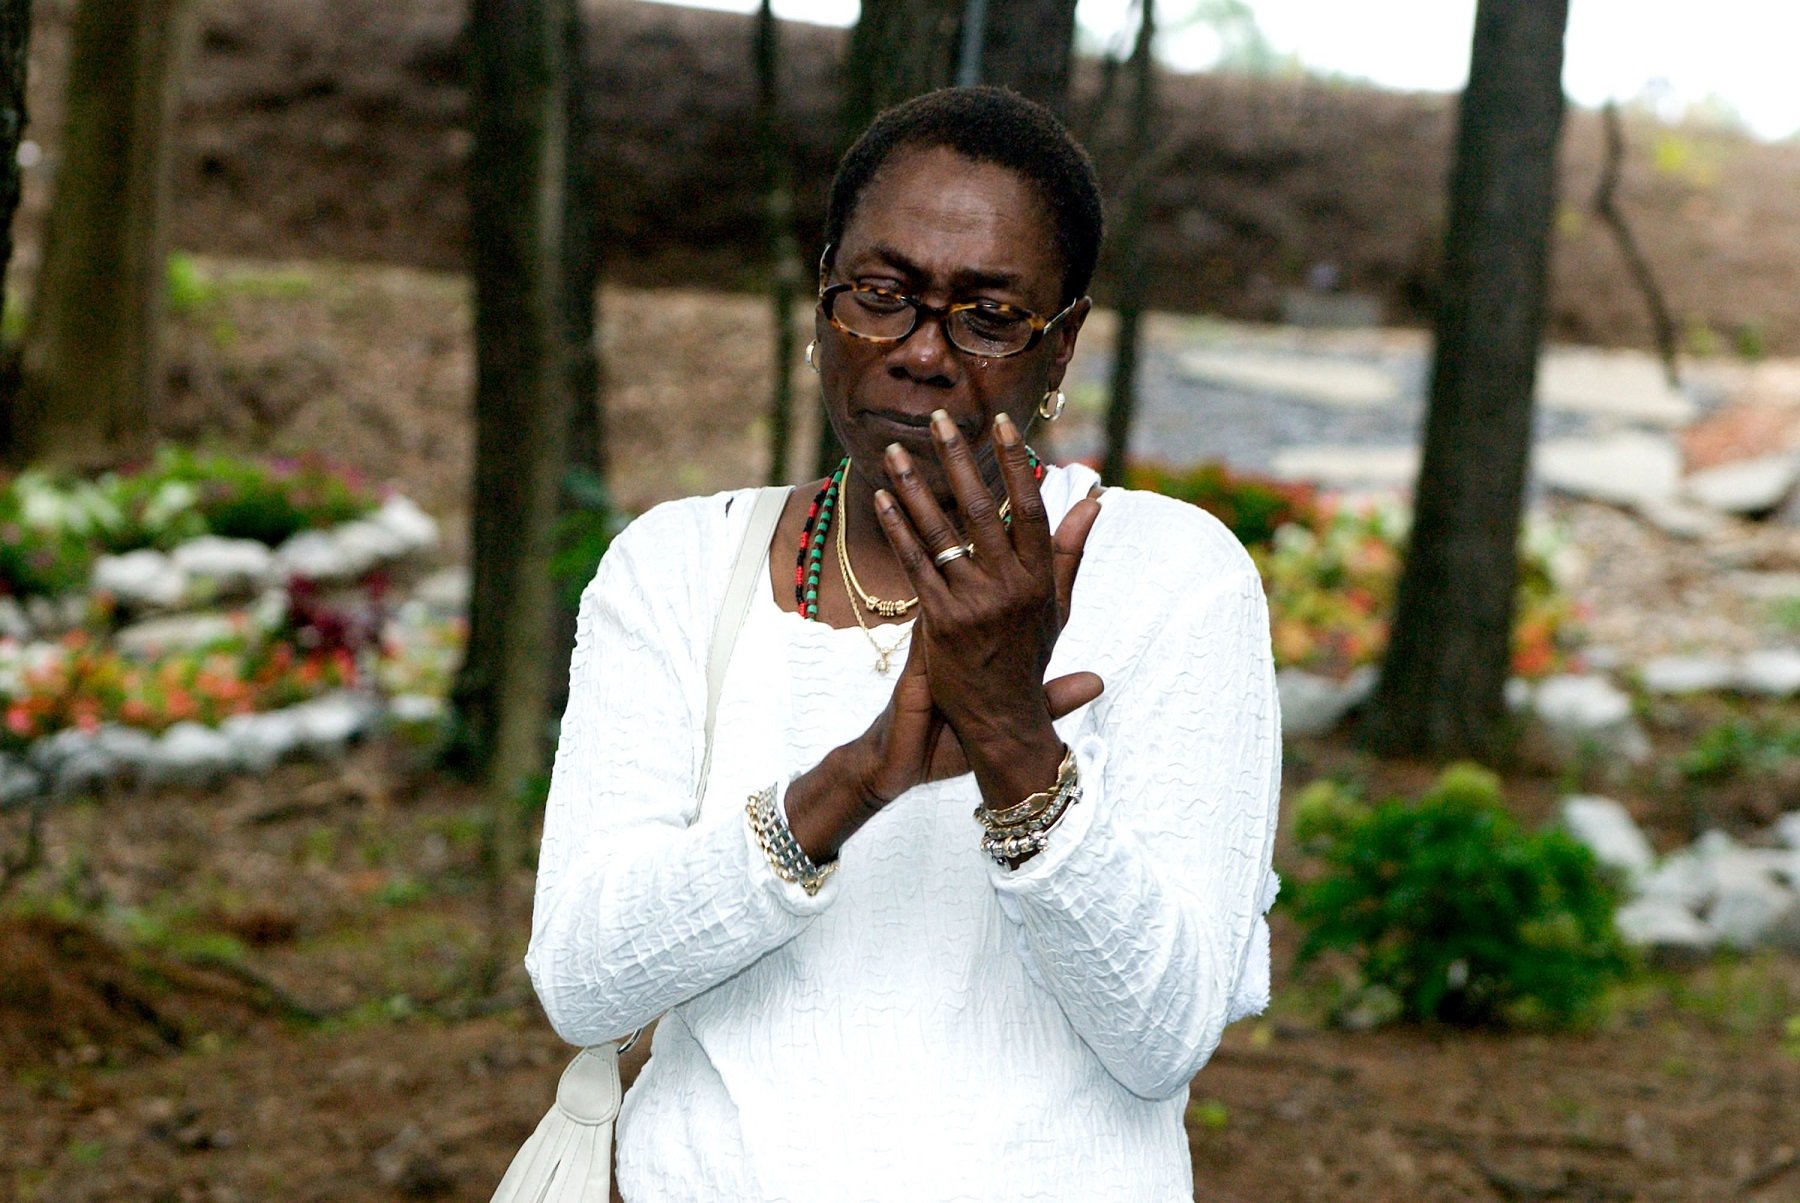 Afeni Shakur is the Subject of a New Authorized Biopic — Here’s What We Know About Her